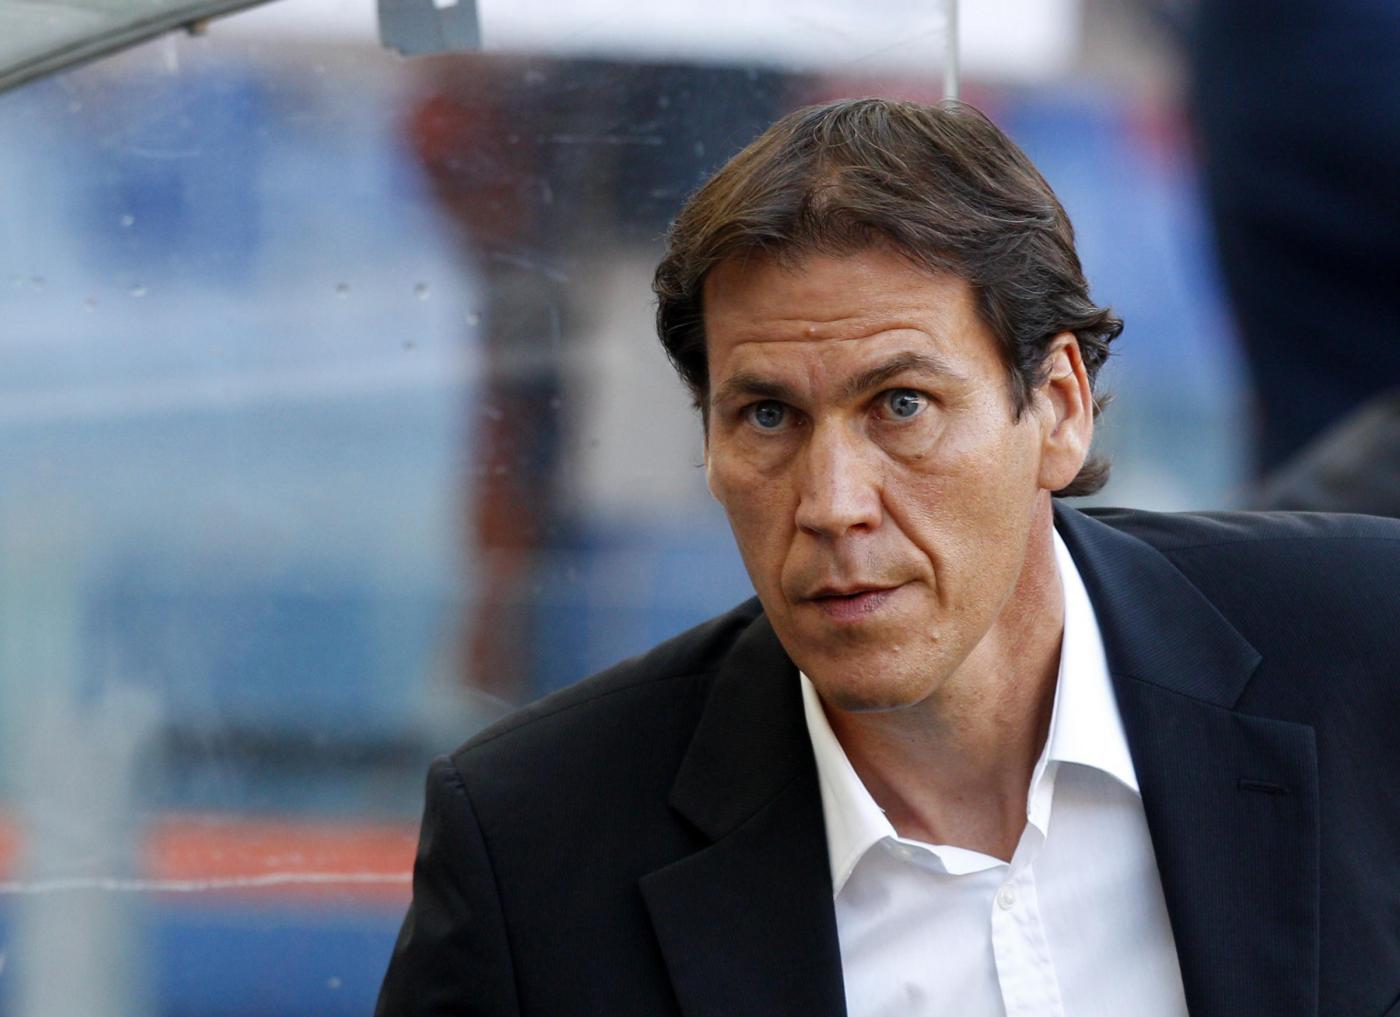 AS Roma coach Rudi Garcia, of France, waits for the kick-off of a Serie A soccer match between AS Roma and Hellas Verona, at Rome's Olympic stadium, Sunday, Sept. 1, 2013. (AP Photo/Riccardo De Luca)